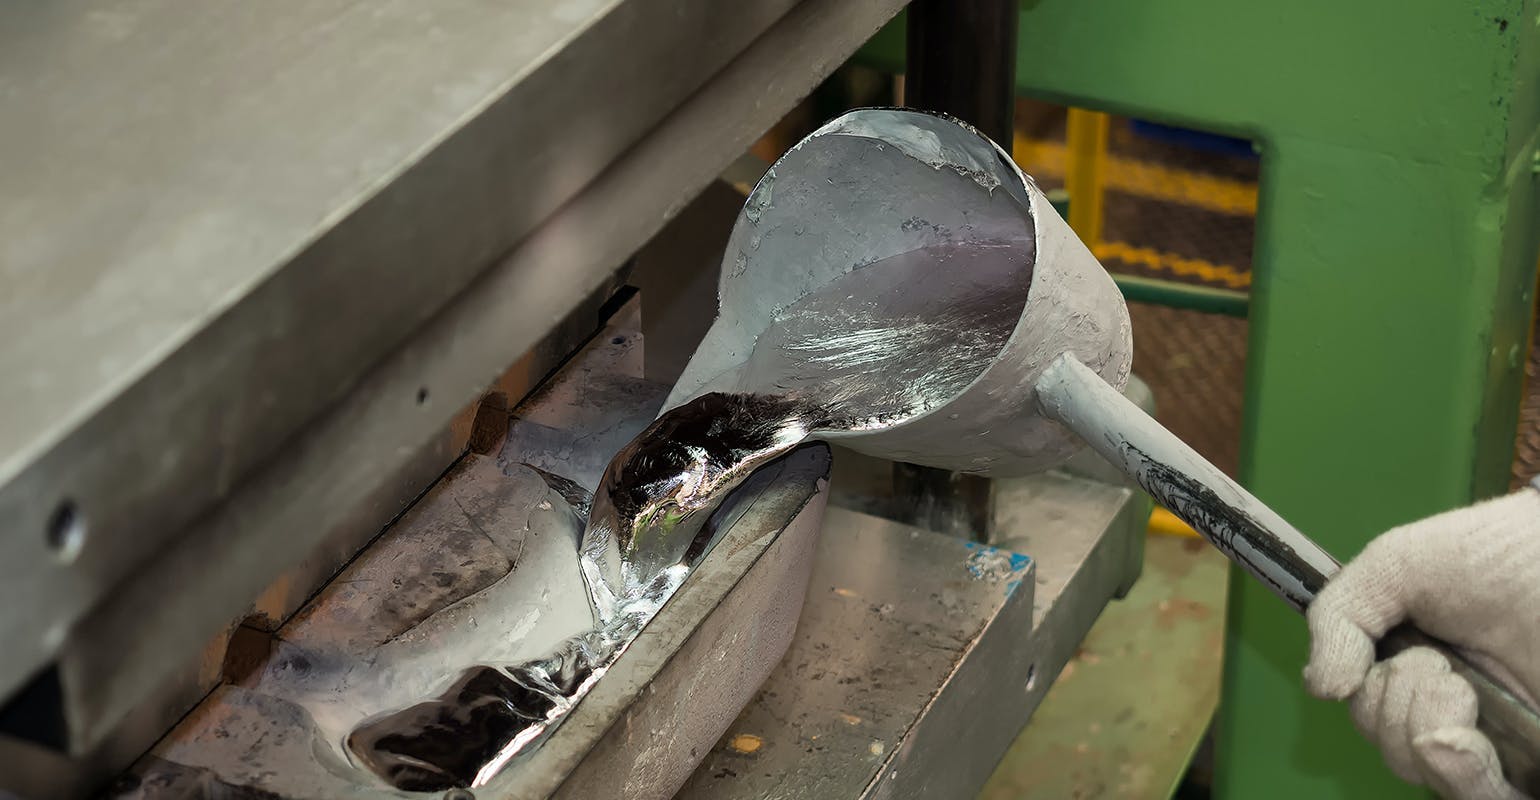 Pouring molten aluminum into a diecasting launder. Oxidation is diminishing the useful value of the alloy whenever the metal is exposed to the atmosphere.